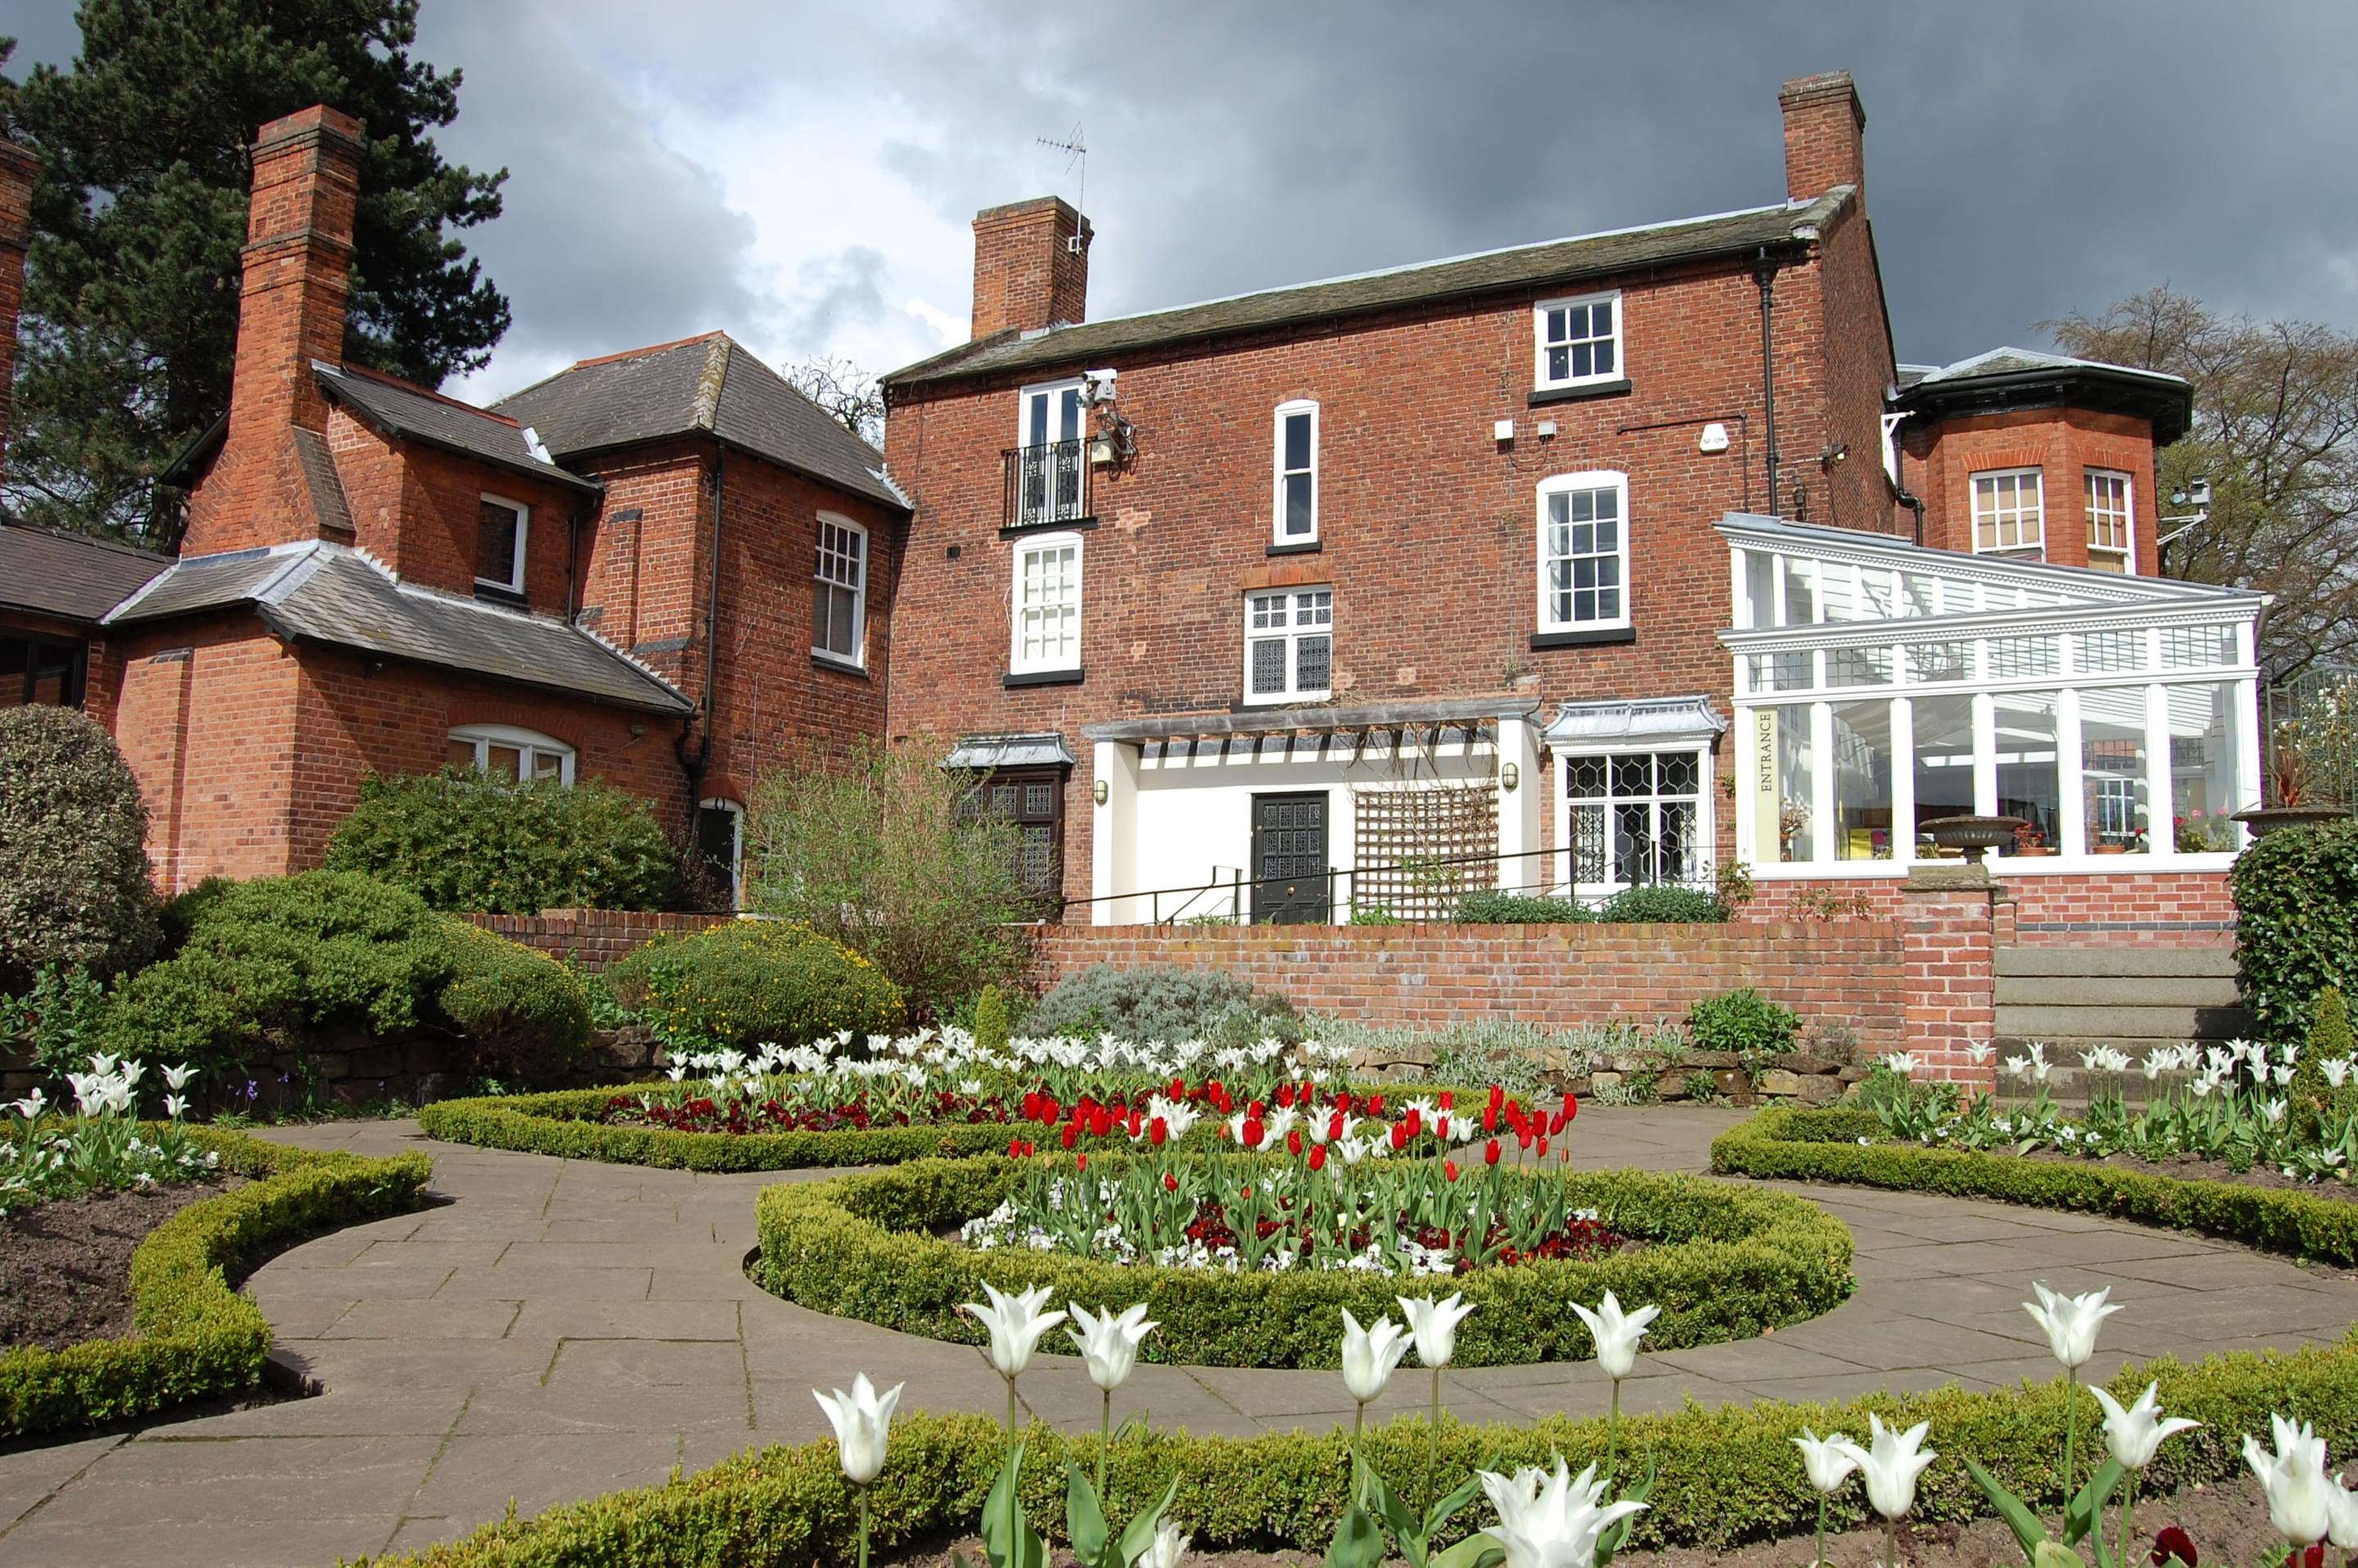 Bantock House Museum and Park Overview